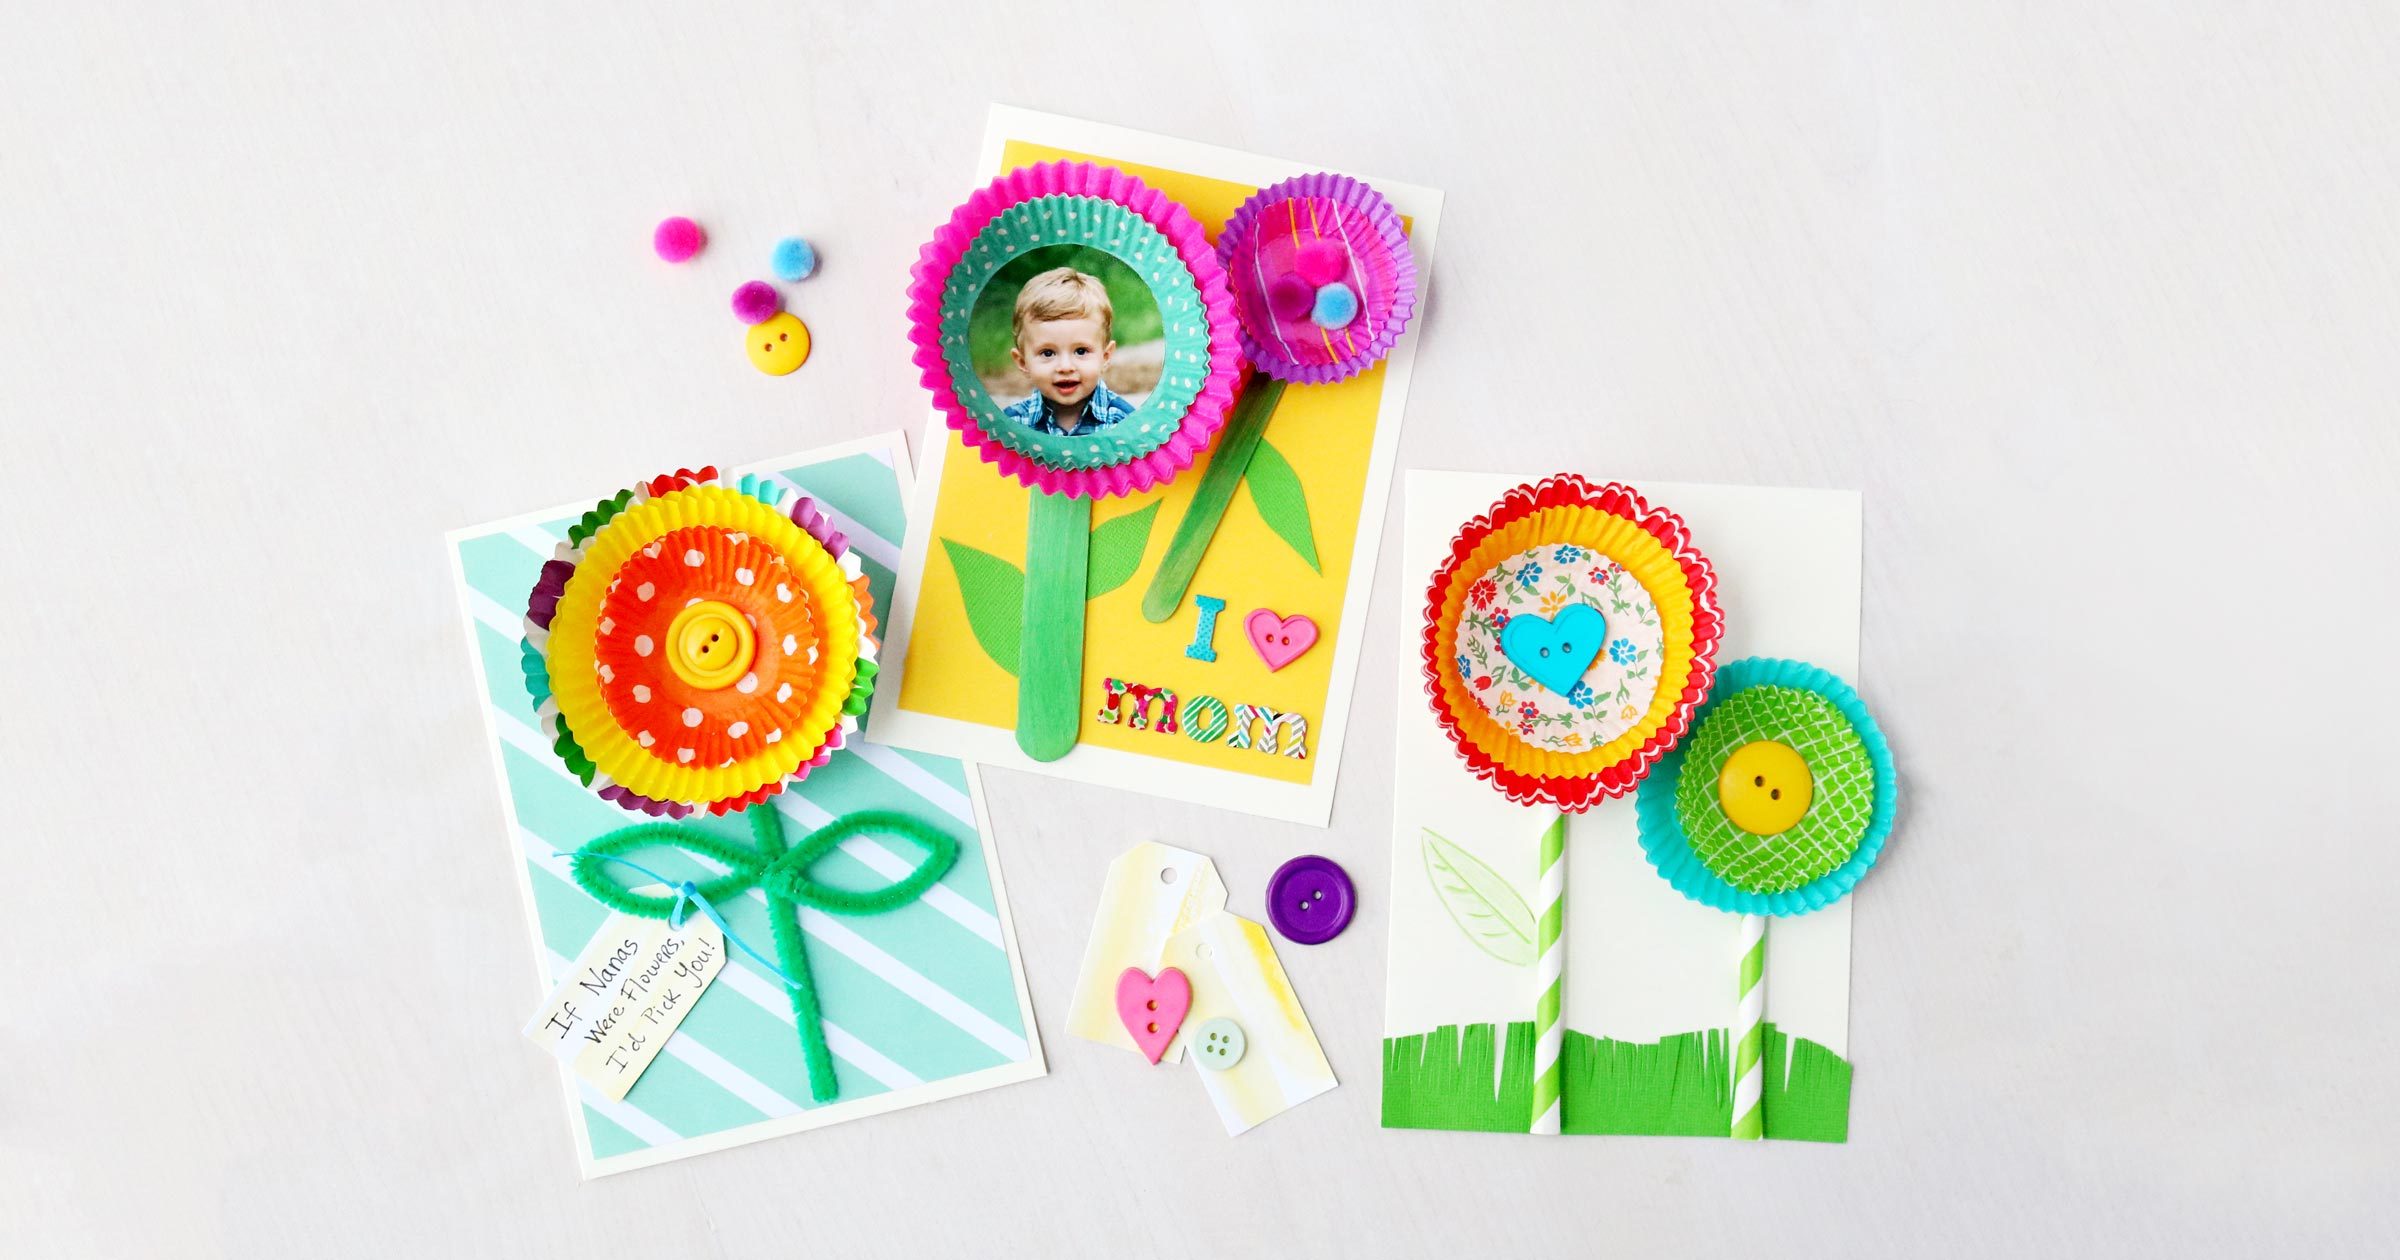 11 Easy Mother's Day Crafts She'll Love